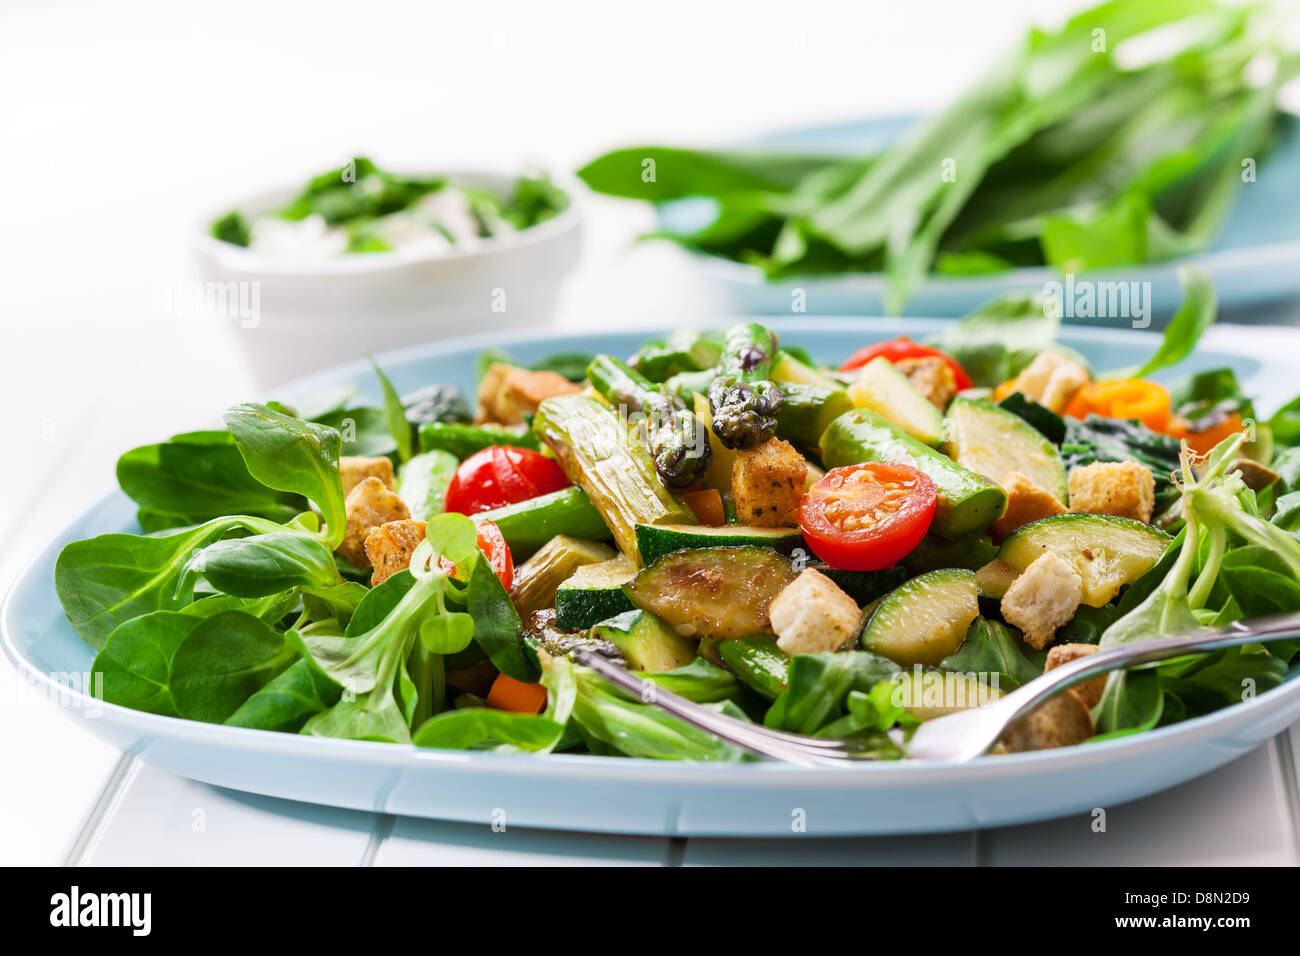 Salad with green asparagus Stock Photo